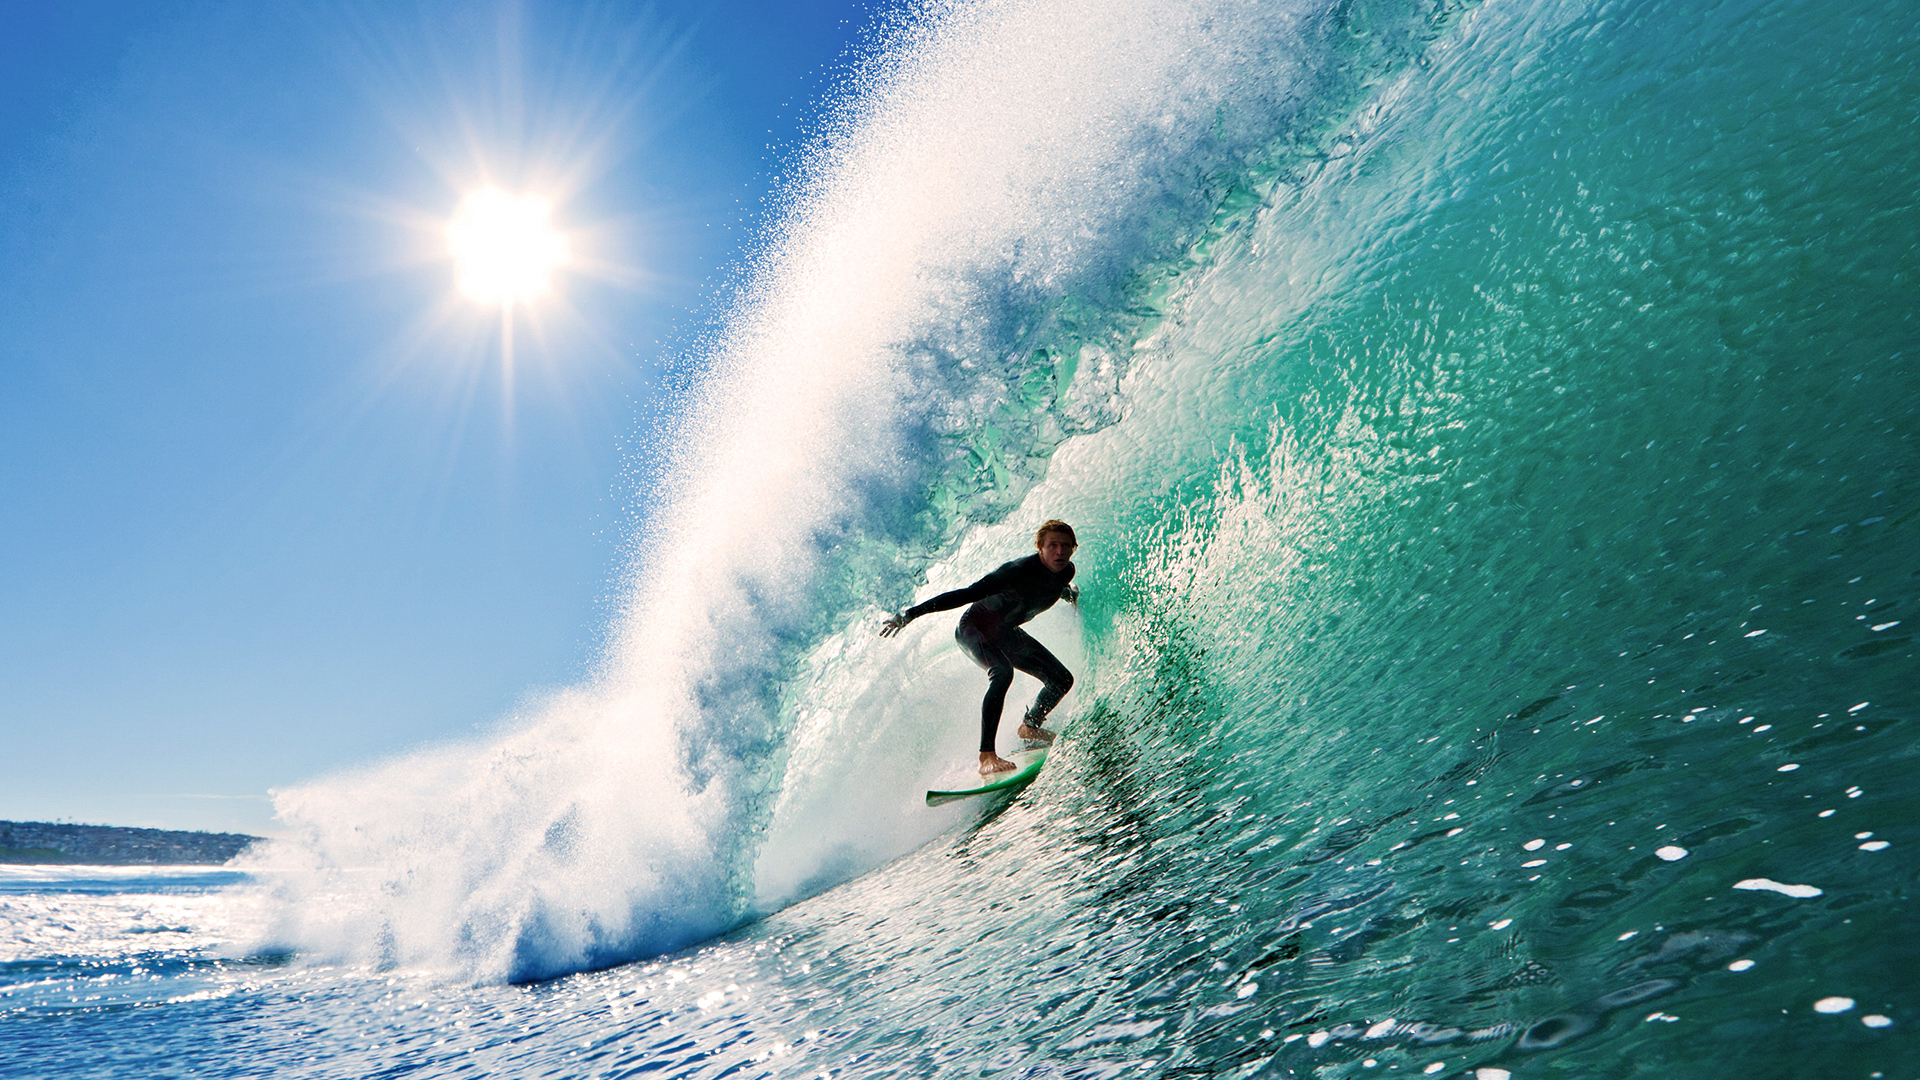 Surfing HD Wallpapers   Wallpaper High Definition High Quality